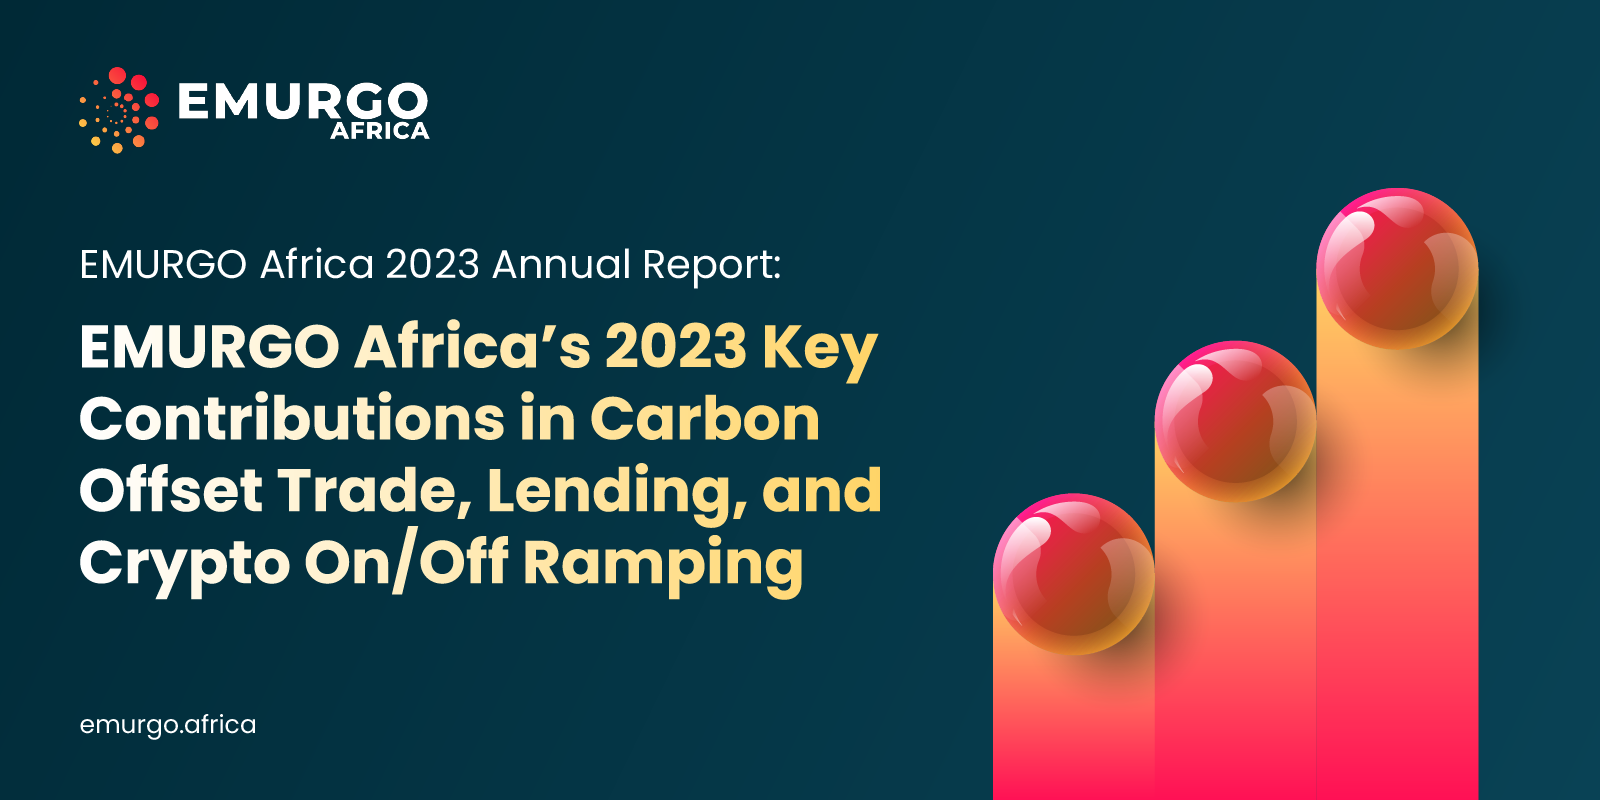 EMURGO Africa 2023 Annual Report: EMURGO Africa's 2023 Key Contributions in Carbon Offset Trade, Lending, and Crypto On/Off Ramping